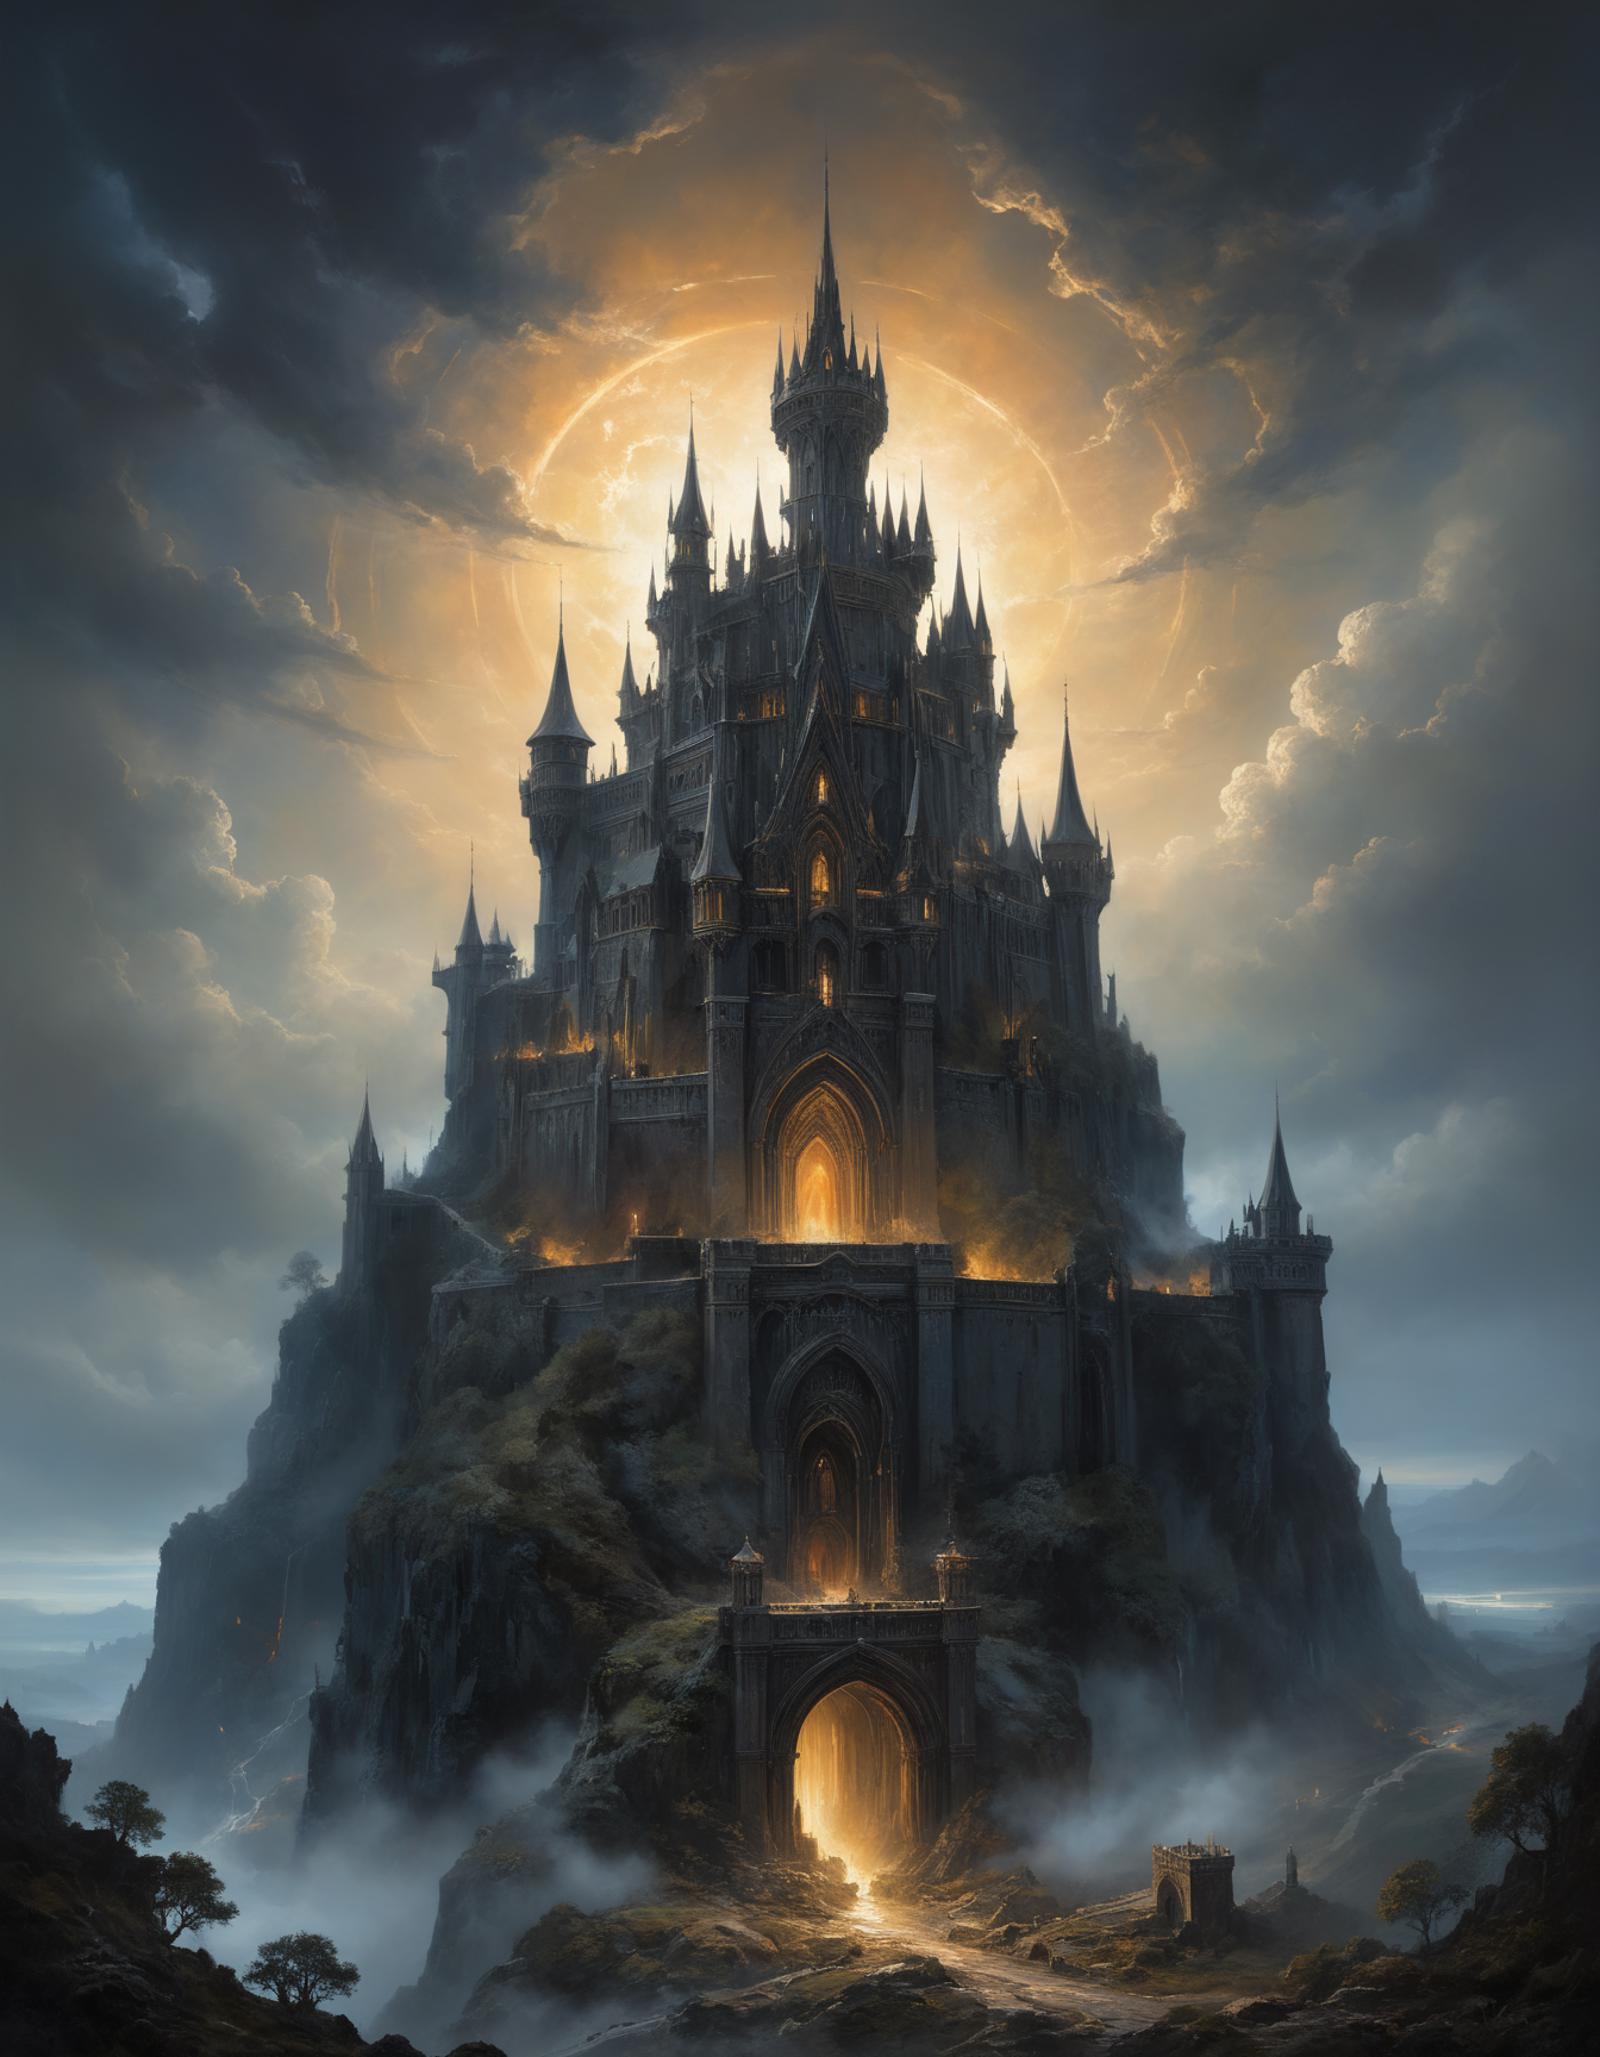 A Castle with a Glowing Sun in the Background